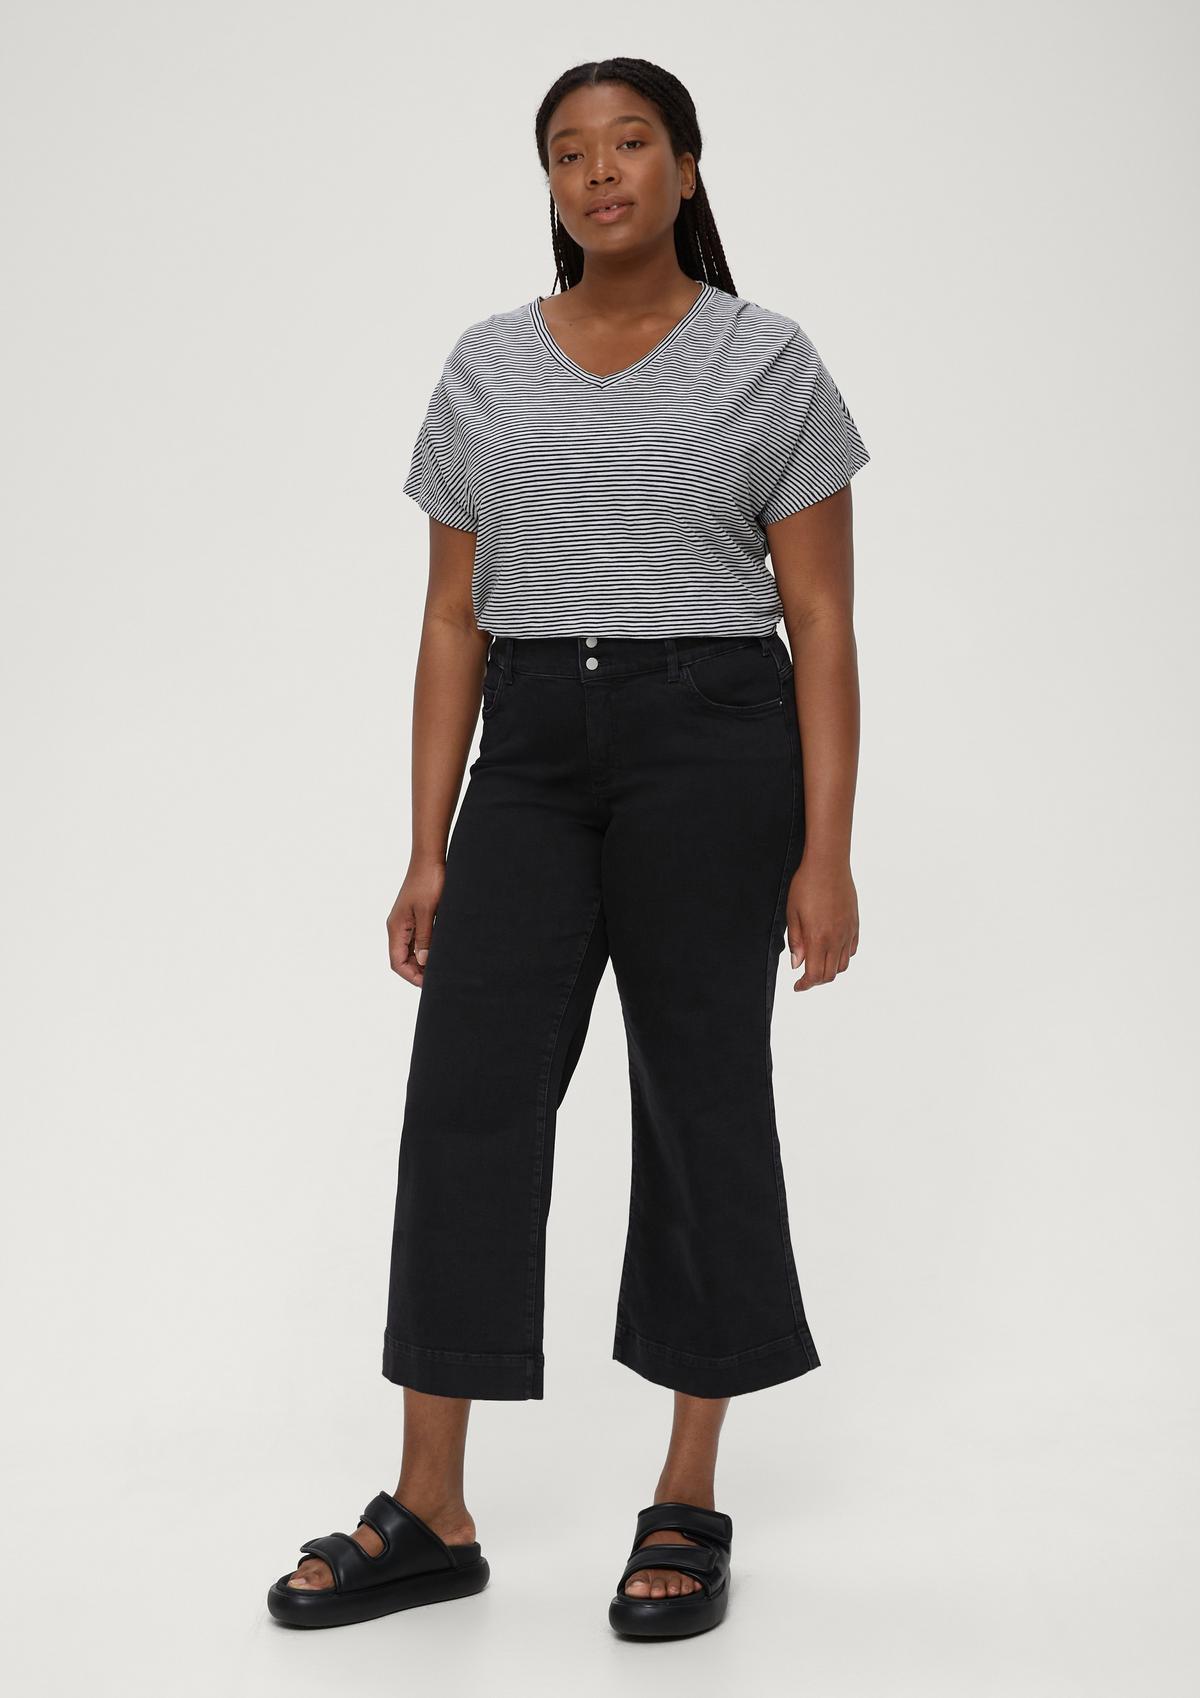 Relaxed fit: culottes with an elasticated waistband